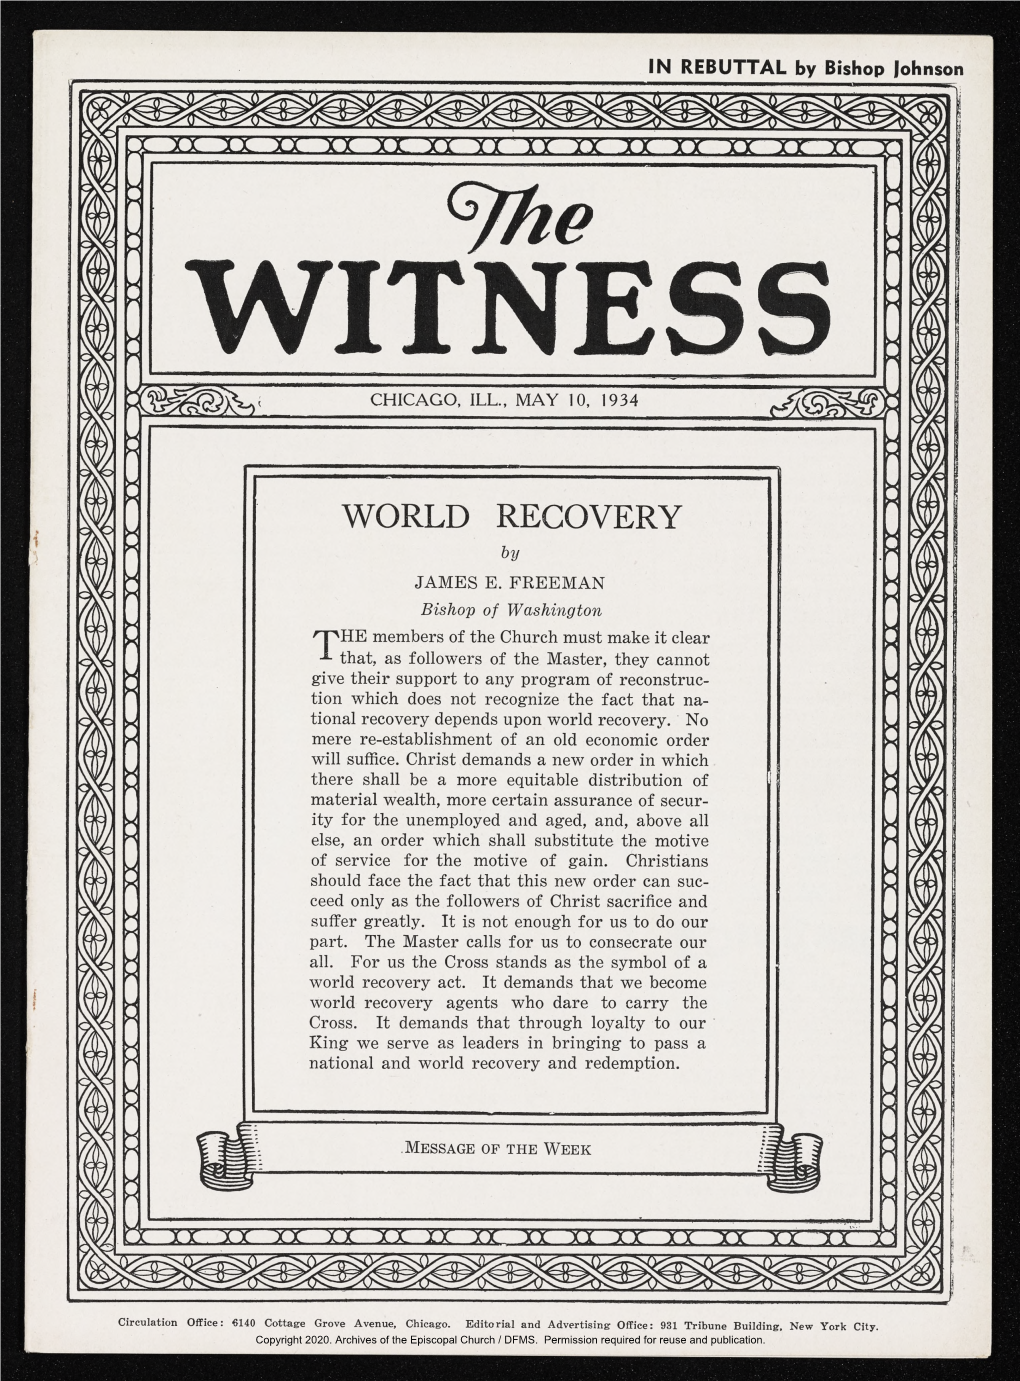 1934 the Witness, Vol. 18, No. 36. May 10, 1934